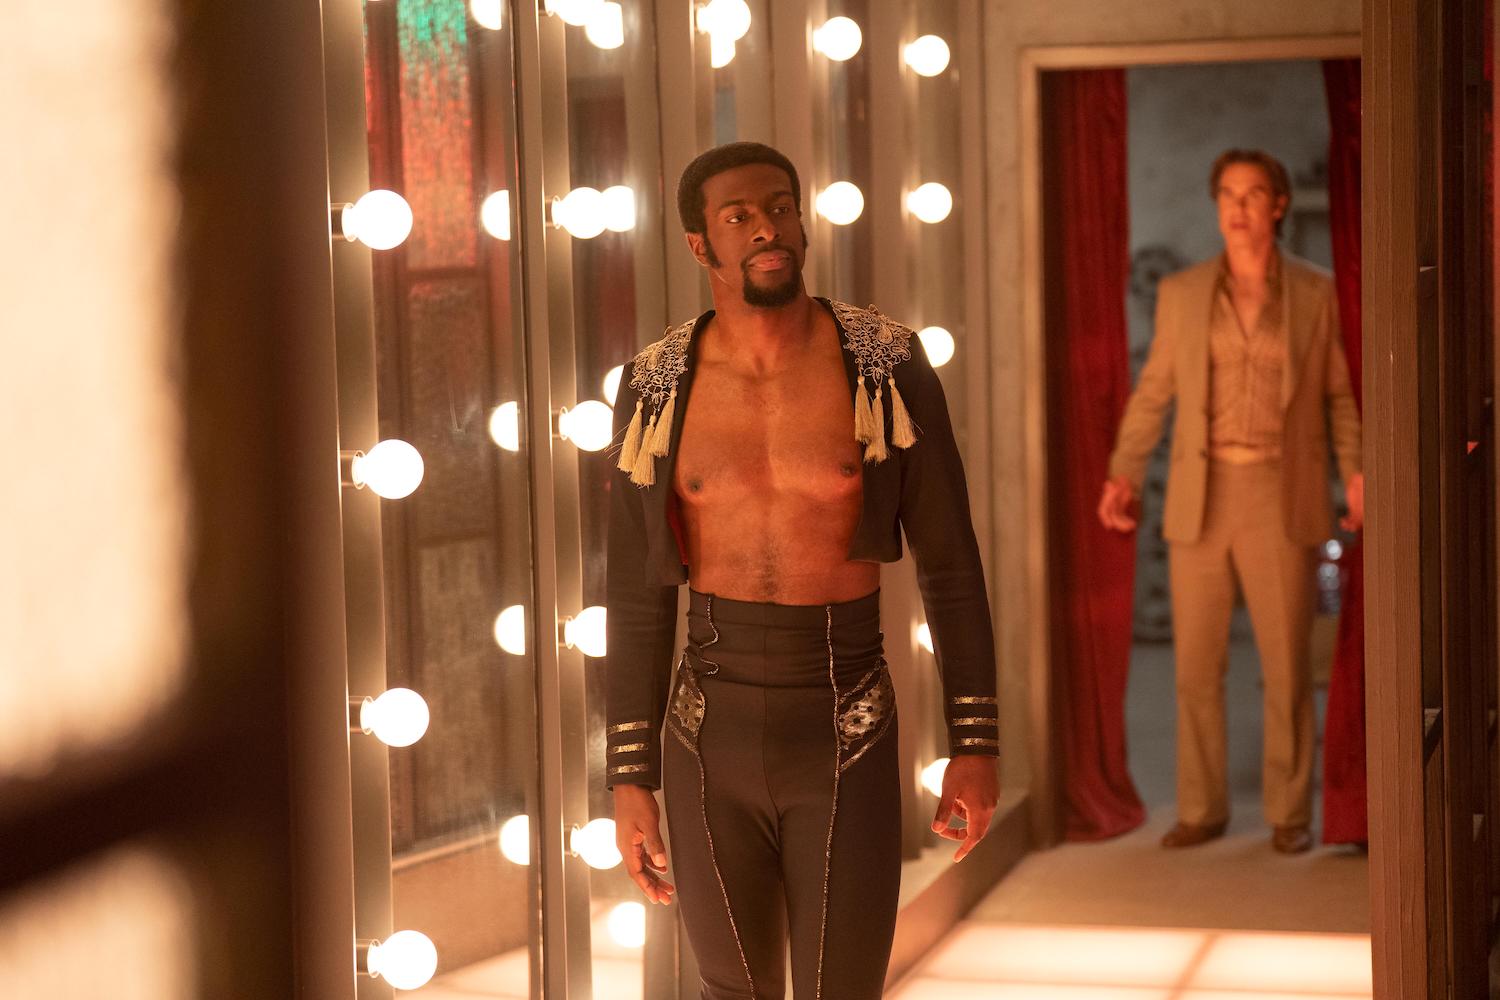 'Welcome to Chippendales' character Otis, played by Quentin Plair, stands in front of mirrors and lights with his shirt unbuttoned.